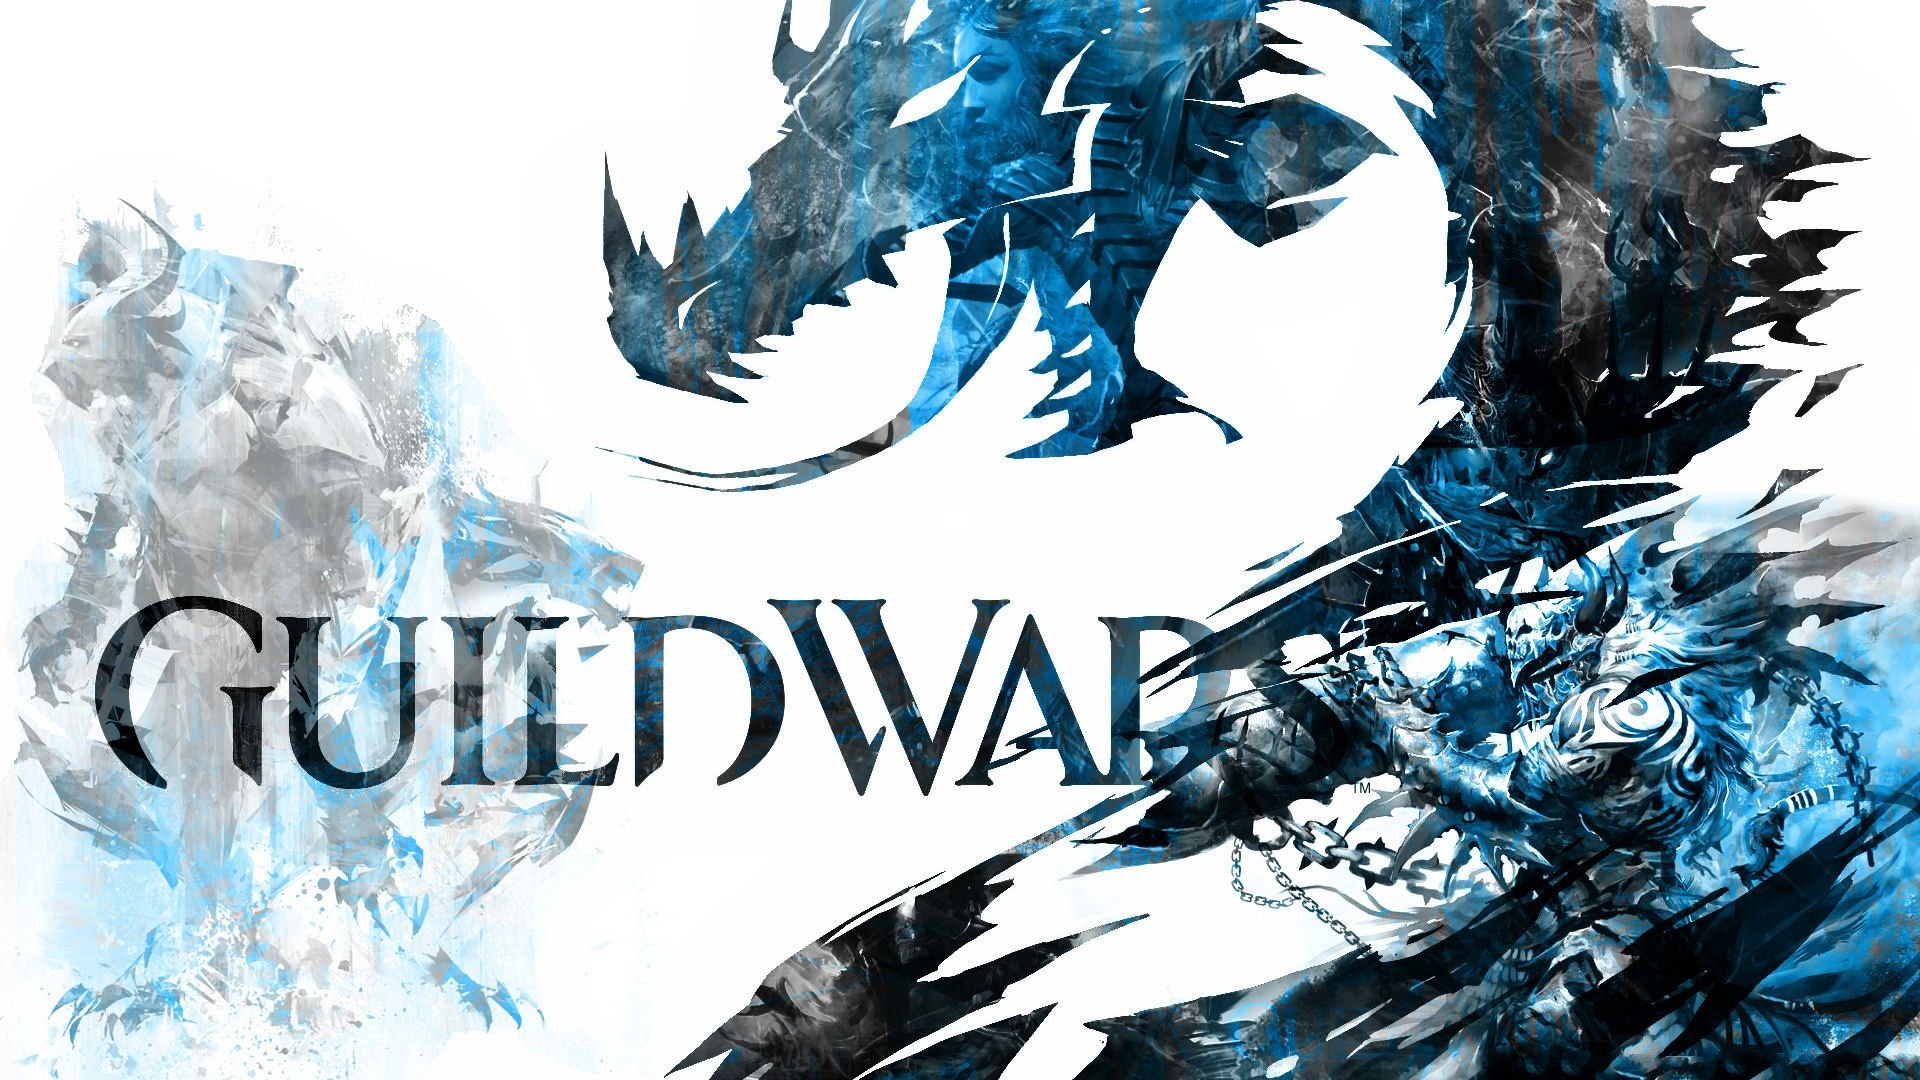 1920x1080 guild wars 2 hd wallpaper hd wallpapers cool images high definition amazing  colourful desktop wallpapers mac desktop images 1080p 1920Ã1080 Wallpaper HD